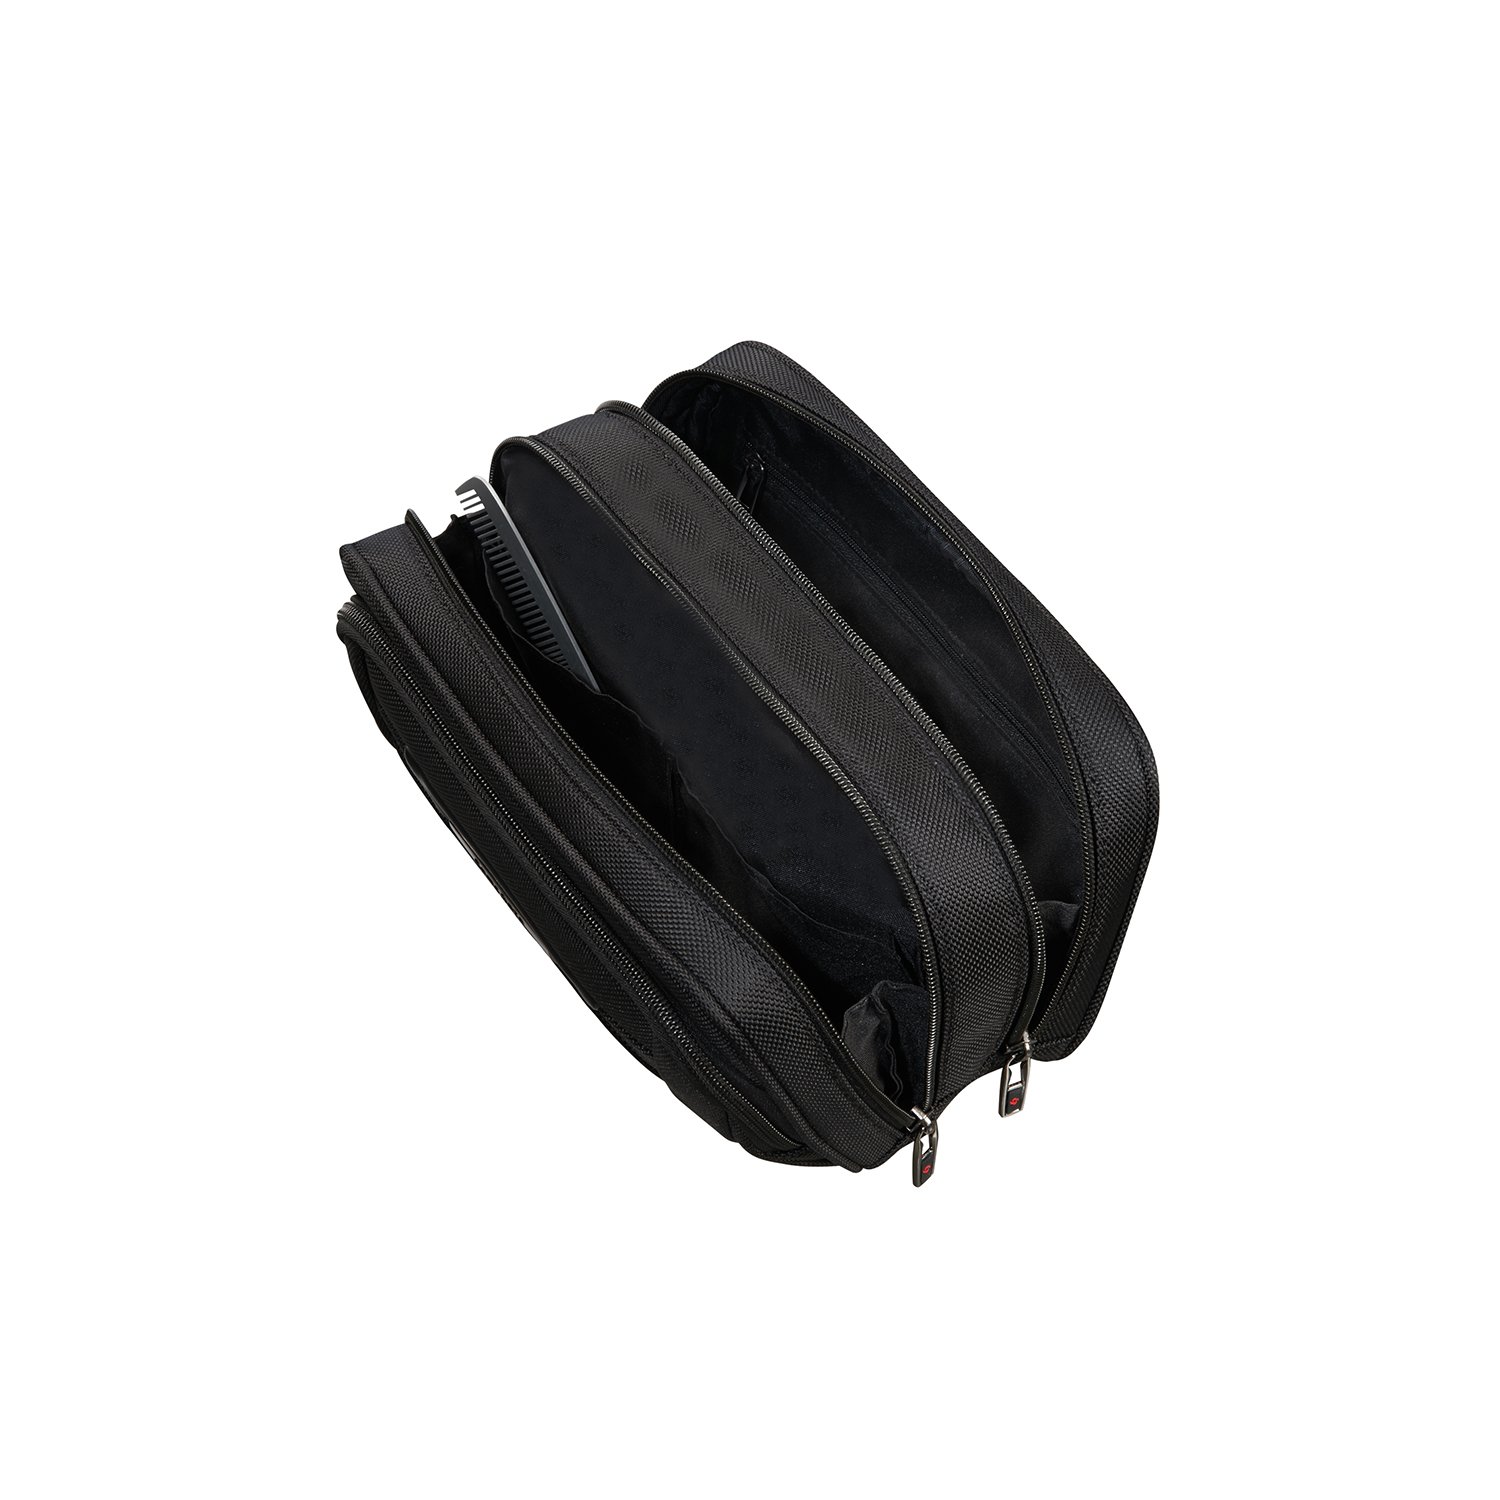 PRO-DLX 5 C. CASES-HORIZONTAL POUCH SCP3-002-SF000*09